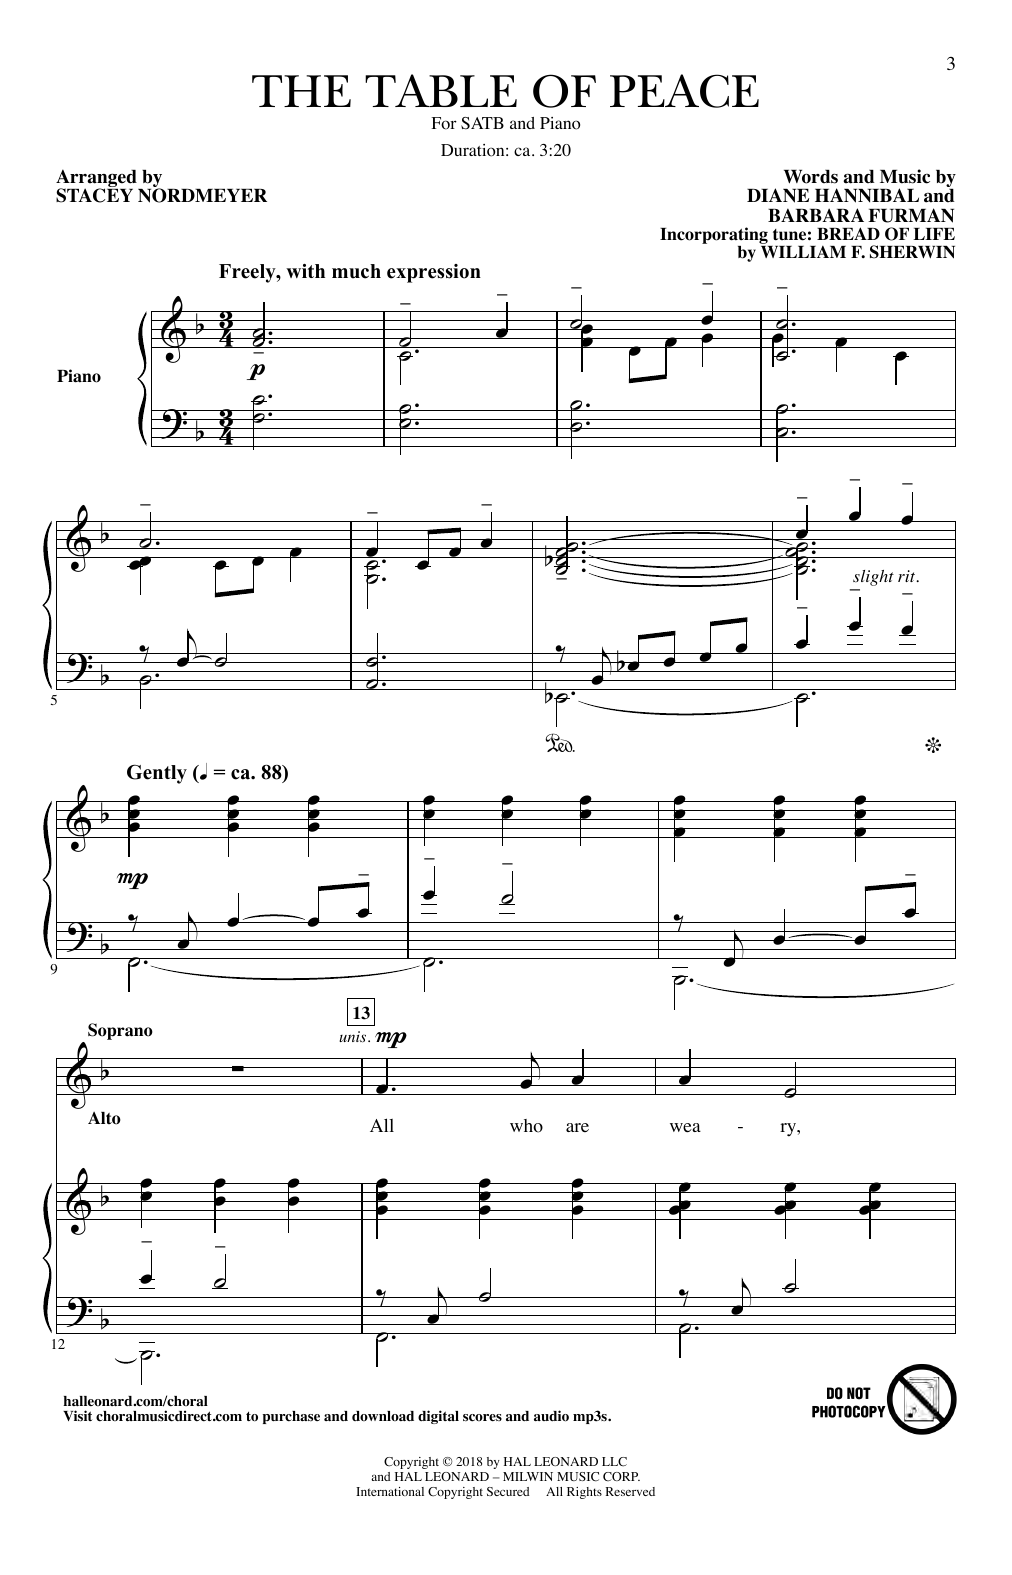 Download Diane Hannival & Barbara Furman The Table Of Peace (arr. Stacey Nordmey Sheet Music